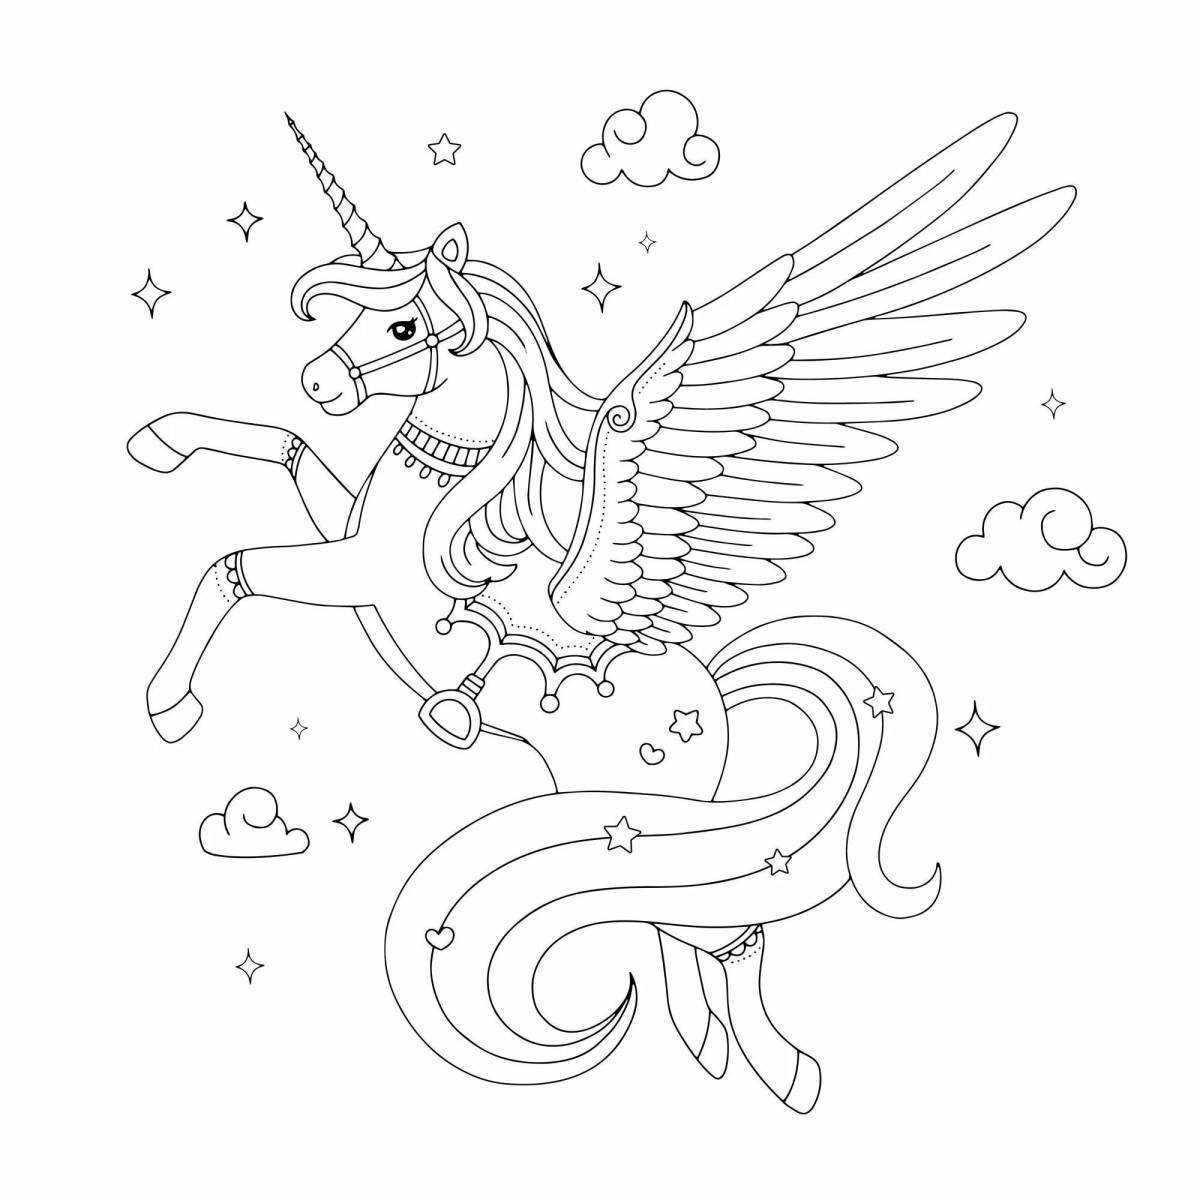 Fascinating coloring unicorn with wings